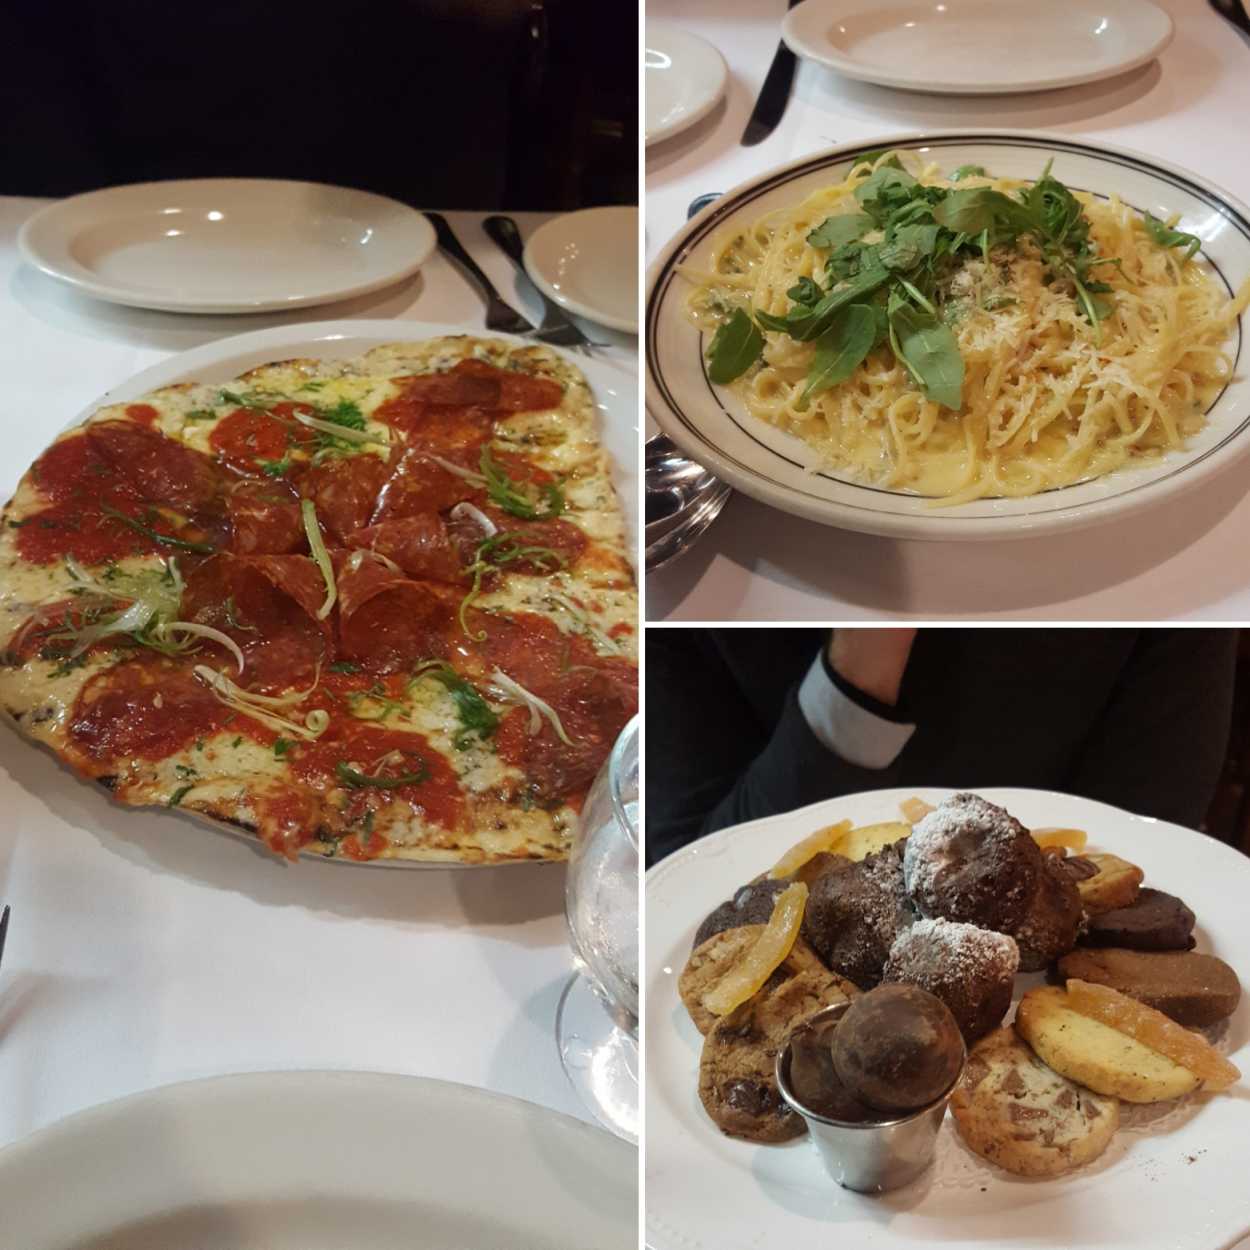 Pizza, pasta, and a boatload of cookies from Al Forno in Providence